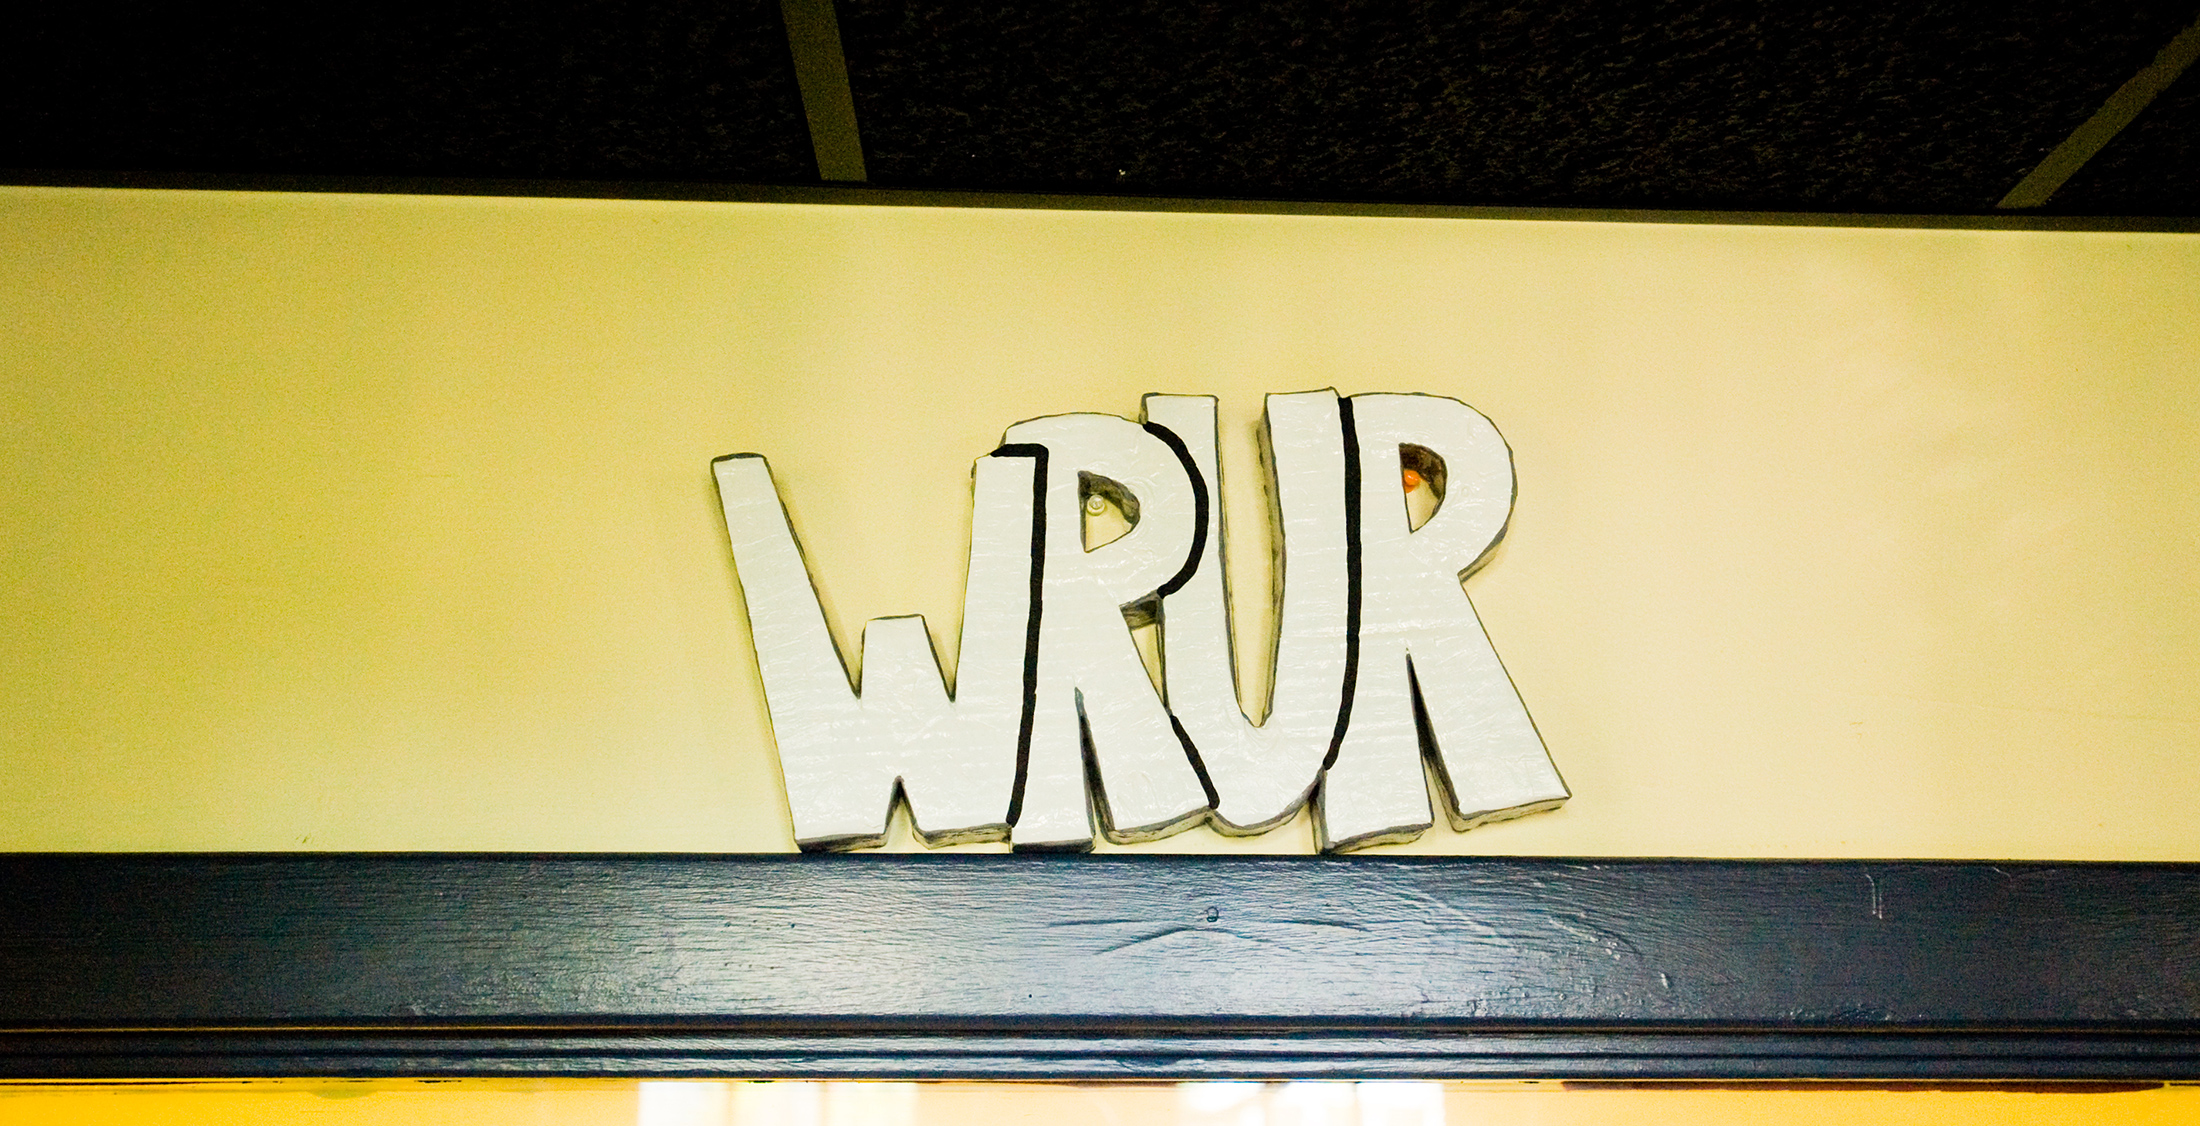 station letters WRUR carved in wood